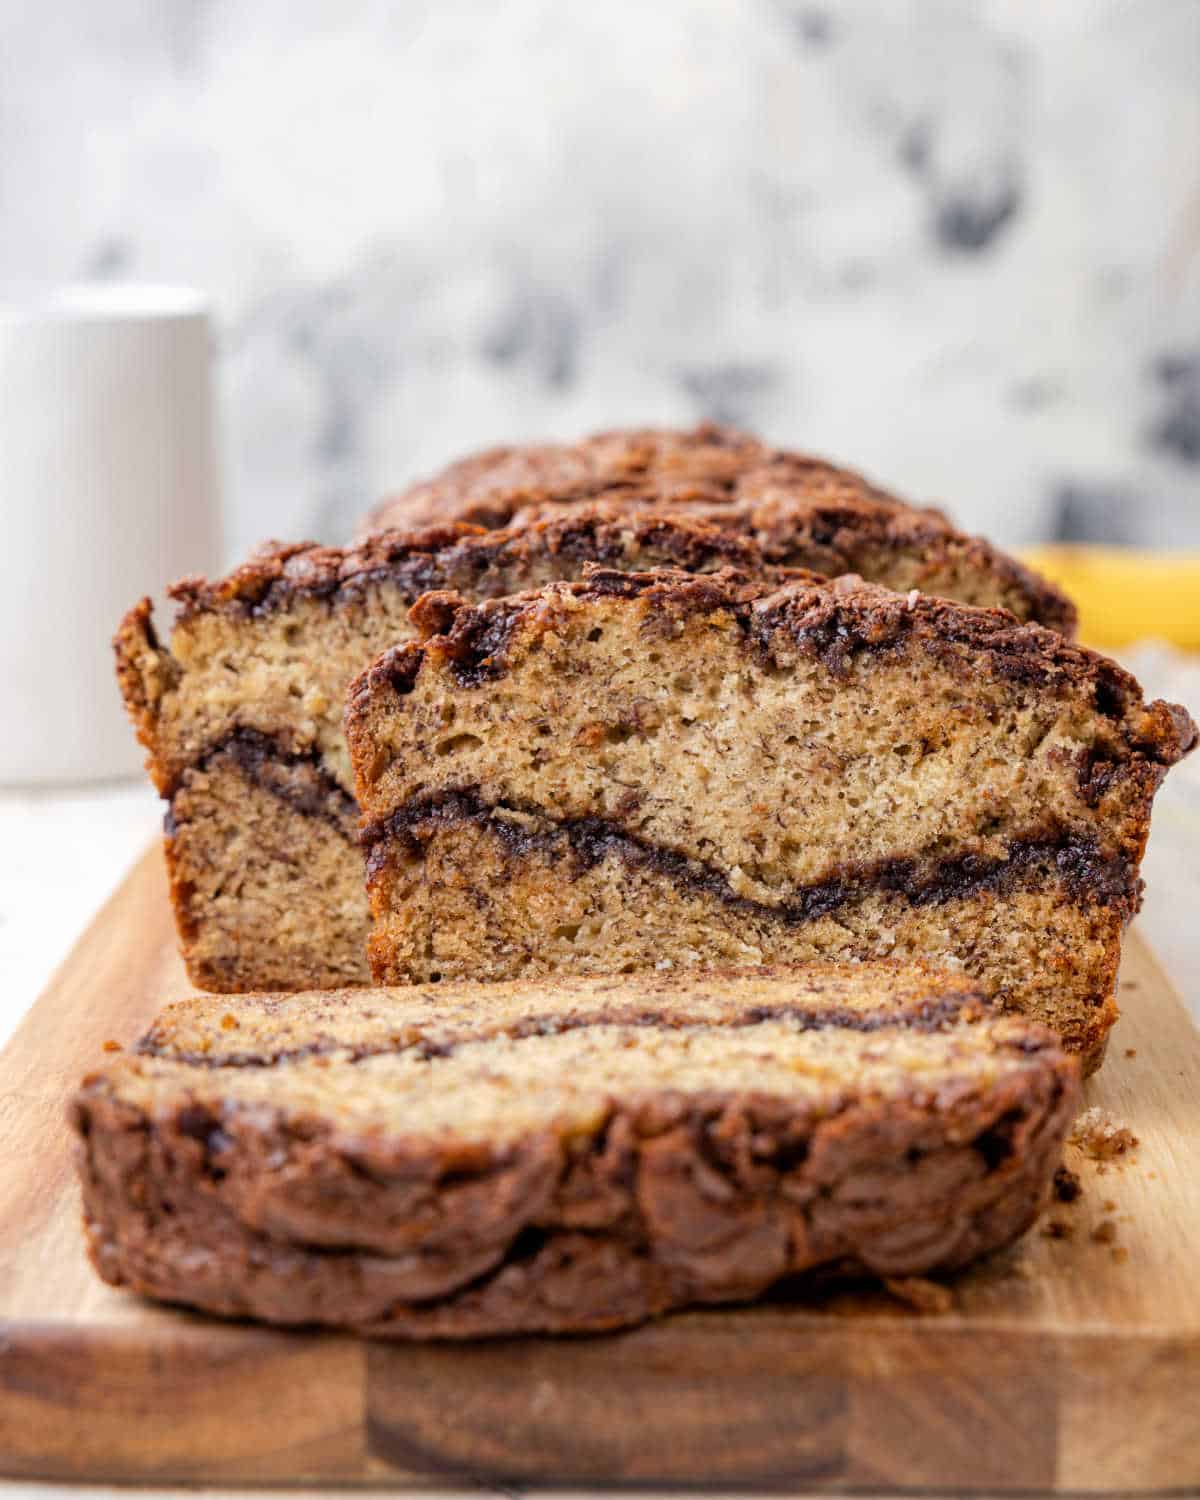 Sliced banana bread with Nutella chocolate sauce.